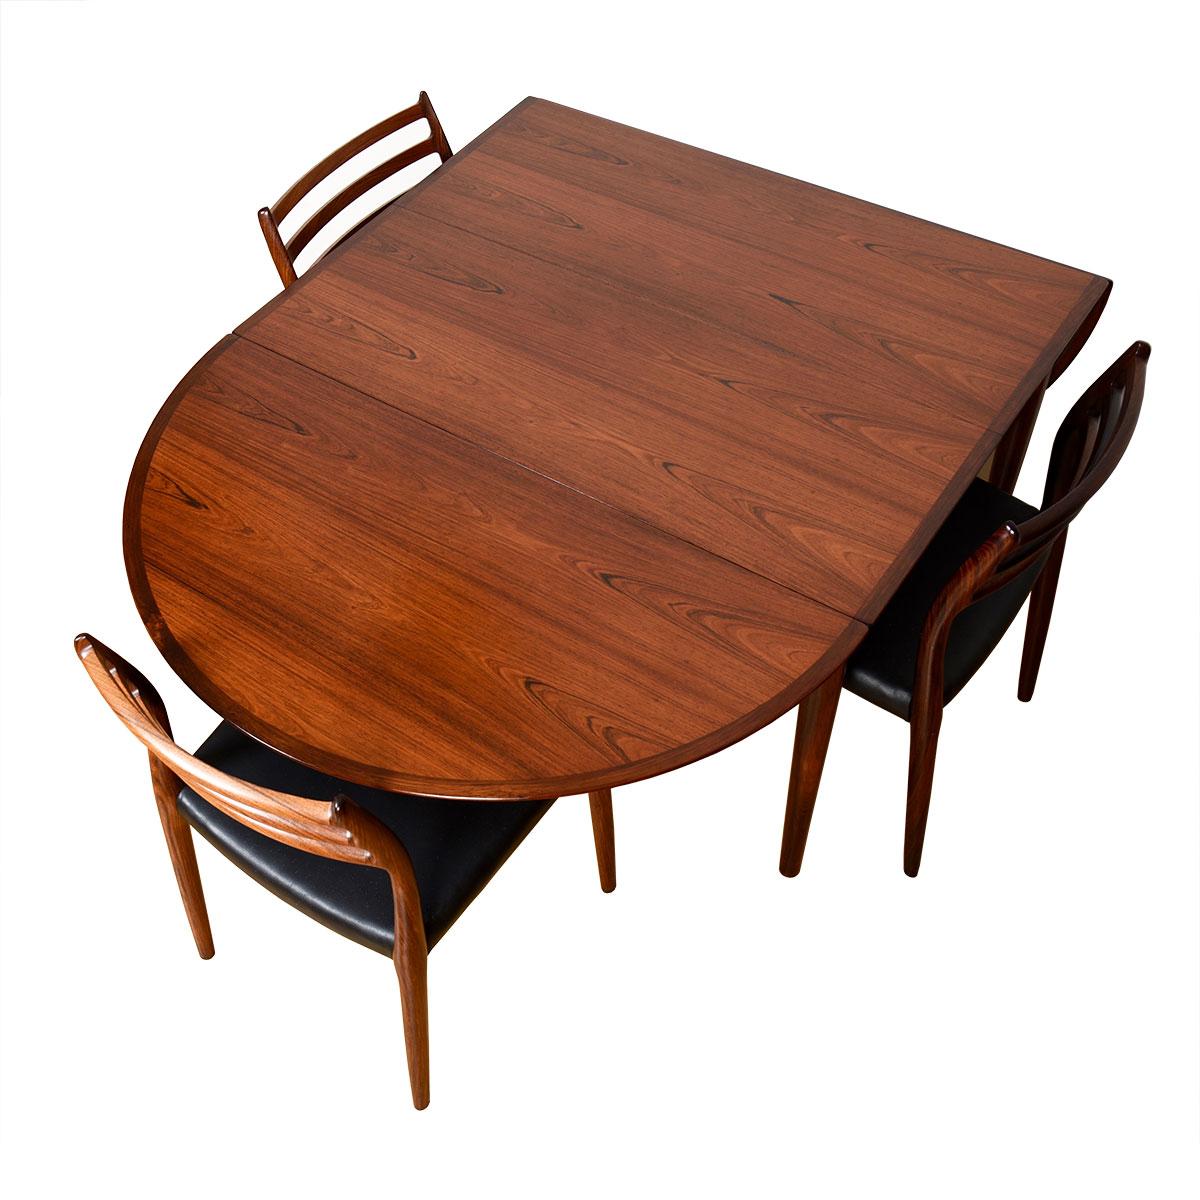 Mid-Century Modern Vodder Danish Rosewood Dining Table with Removable Drop Leaves + Middle Leaf